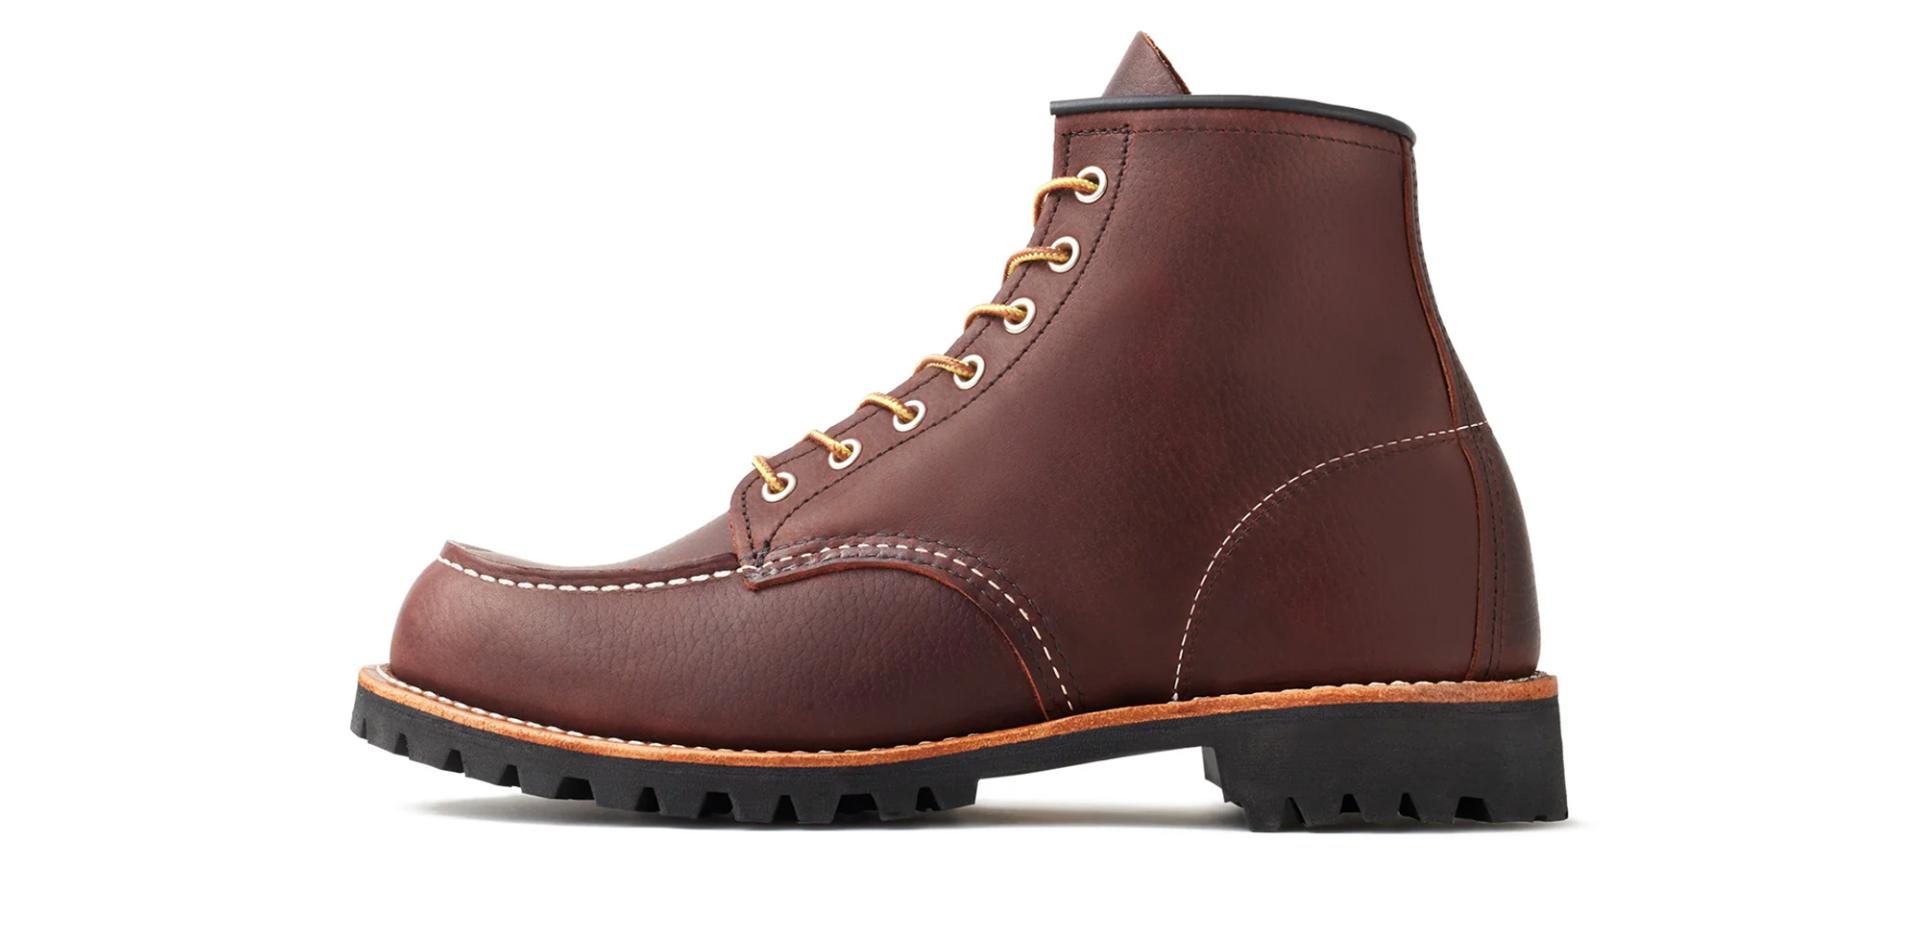 RED WING 8146